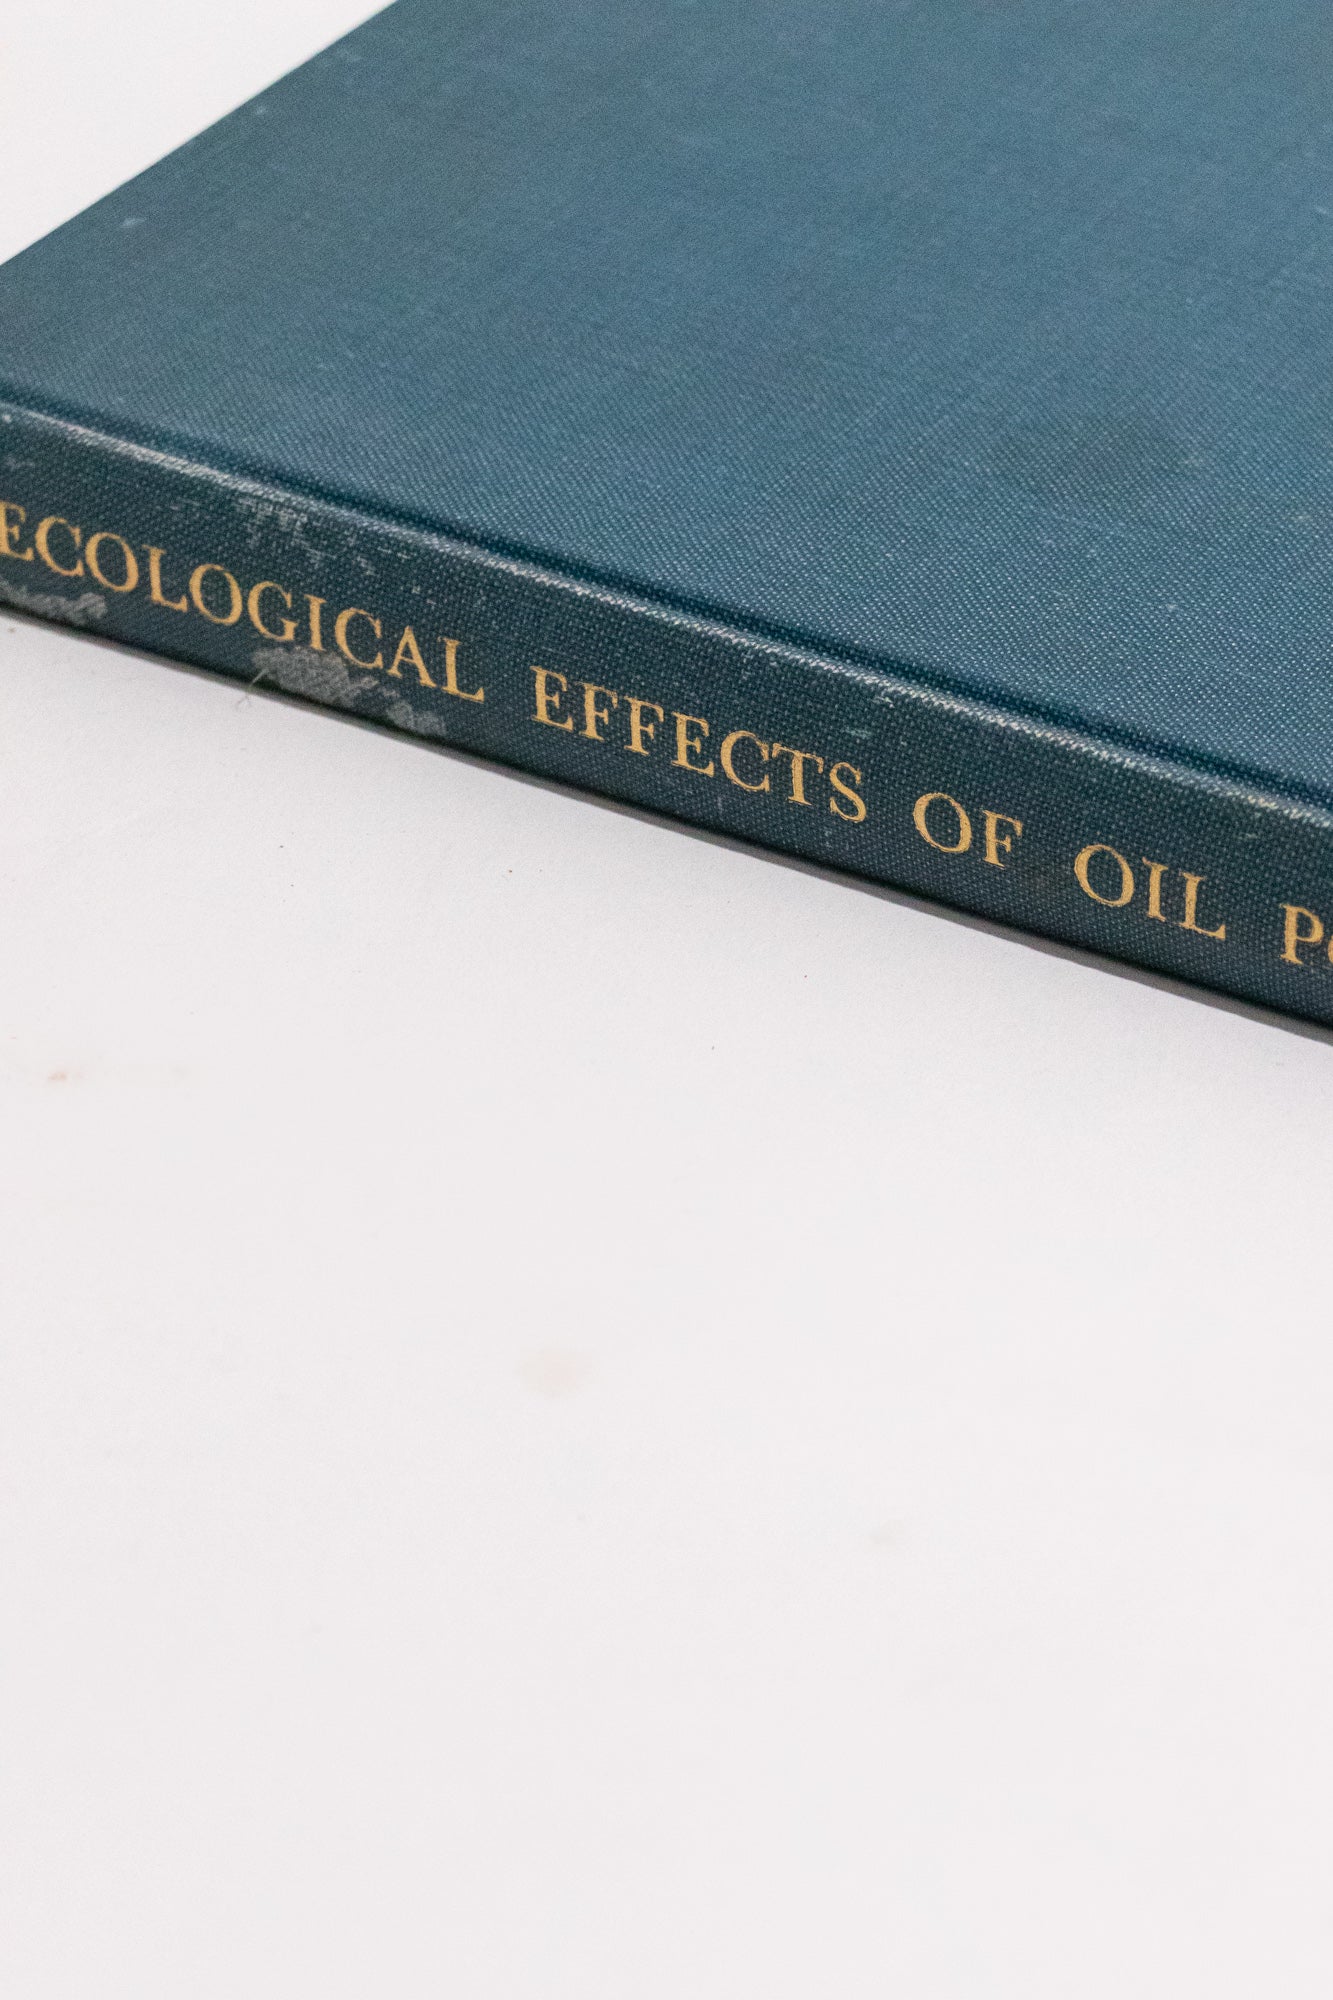 The Ecological Effects of Oil Pollution on Littoral Communities - Stemcell Science Shop